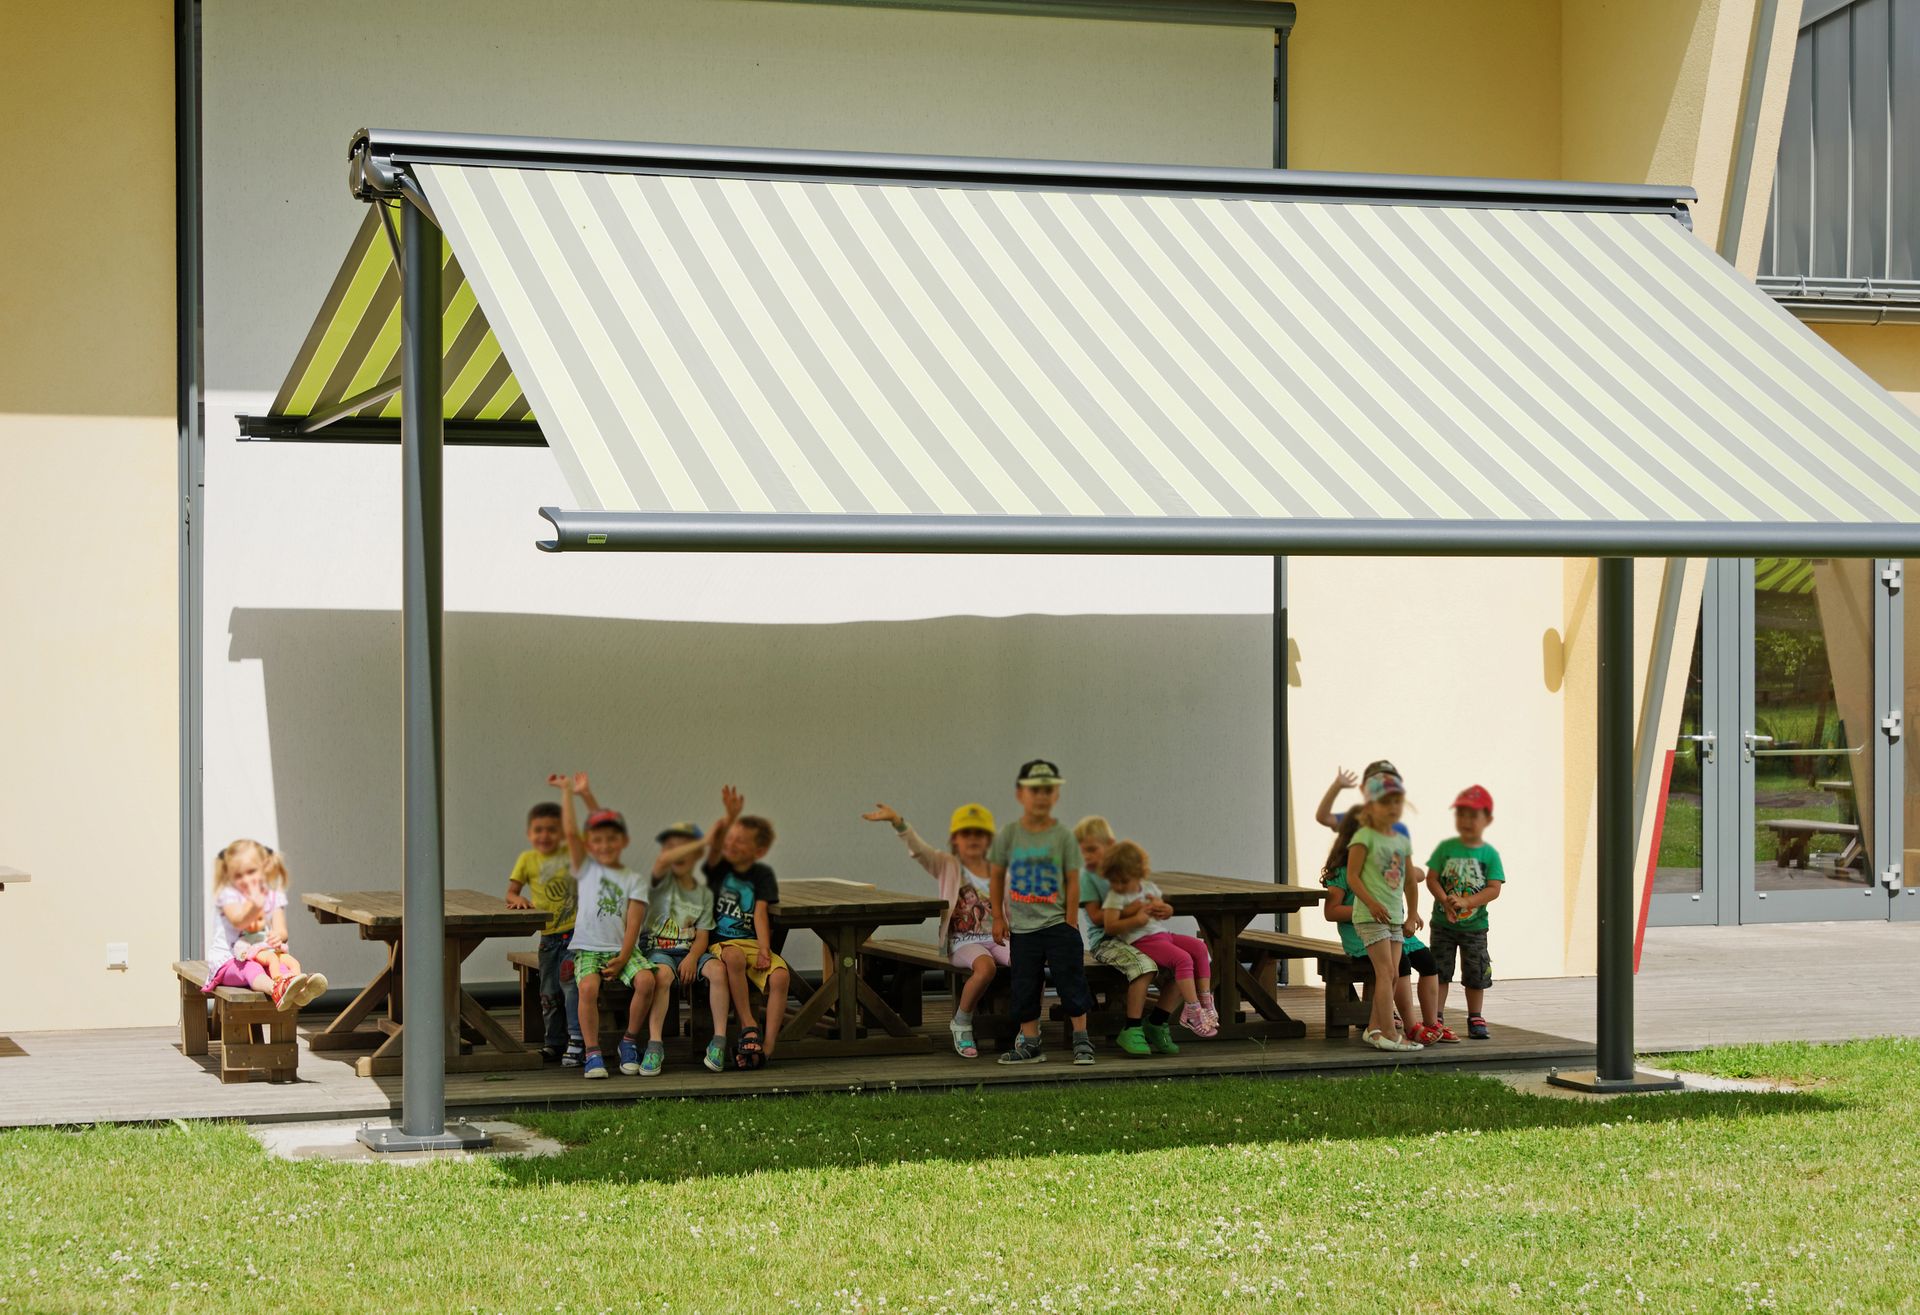 Awning at infant schools